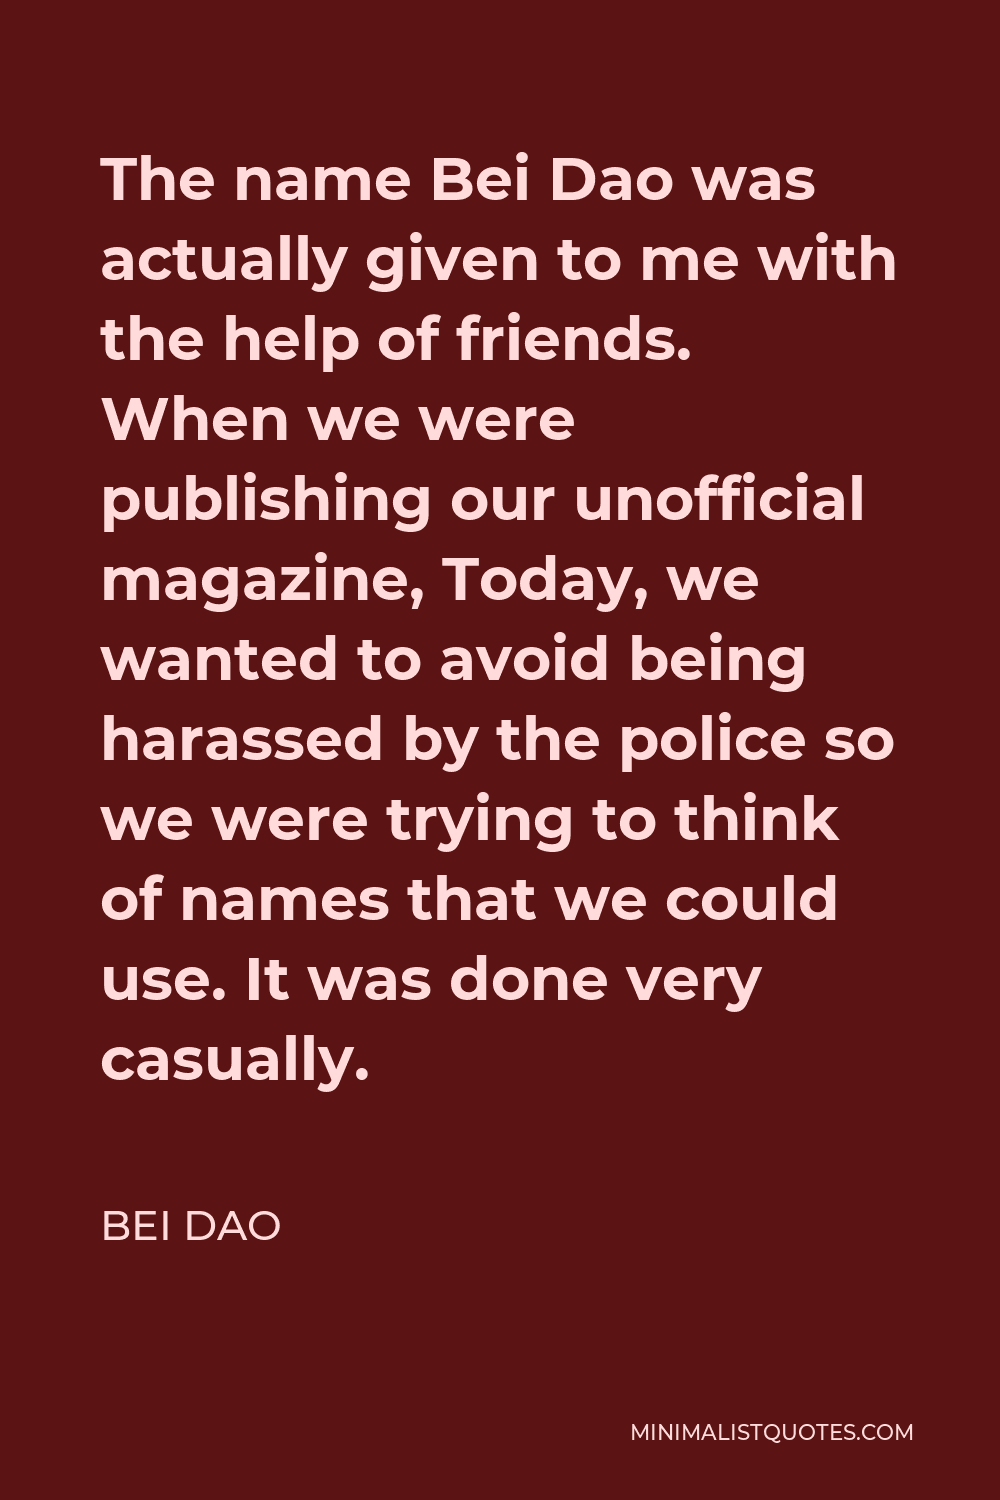 Bei Dao Quote - The name Bei Dao was actually given to me with the help of friends. When we were publishing our unofficial magazine, Today, we wanted to avoid being harassed by the police so we were trying to think of names that we could use. It was done very casually.